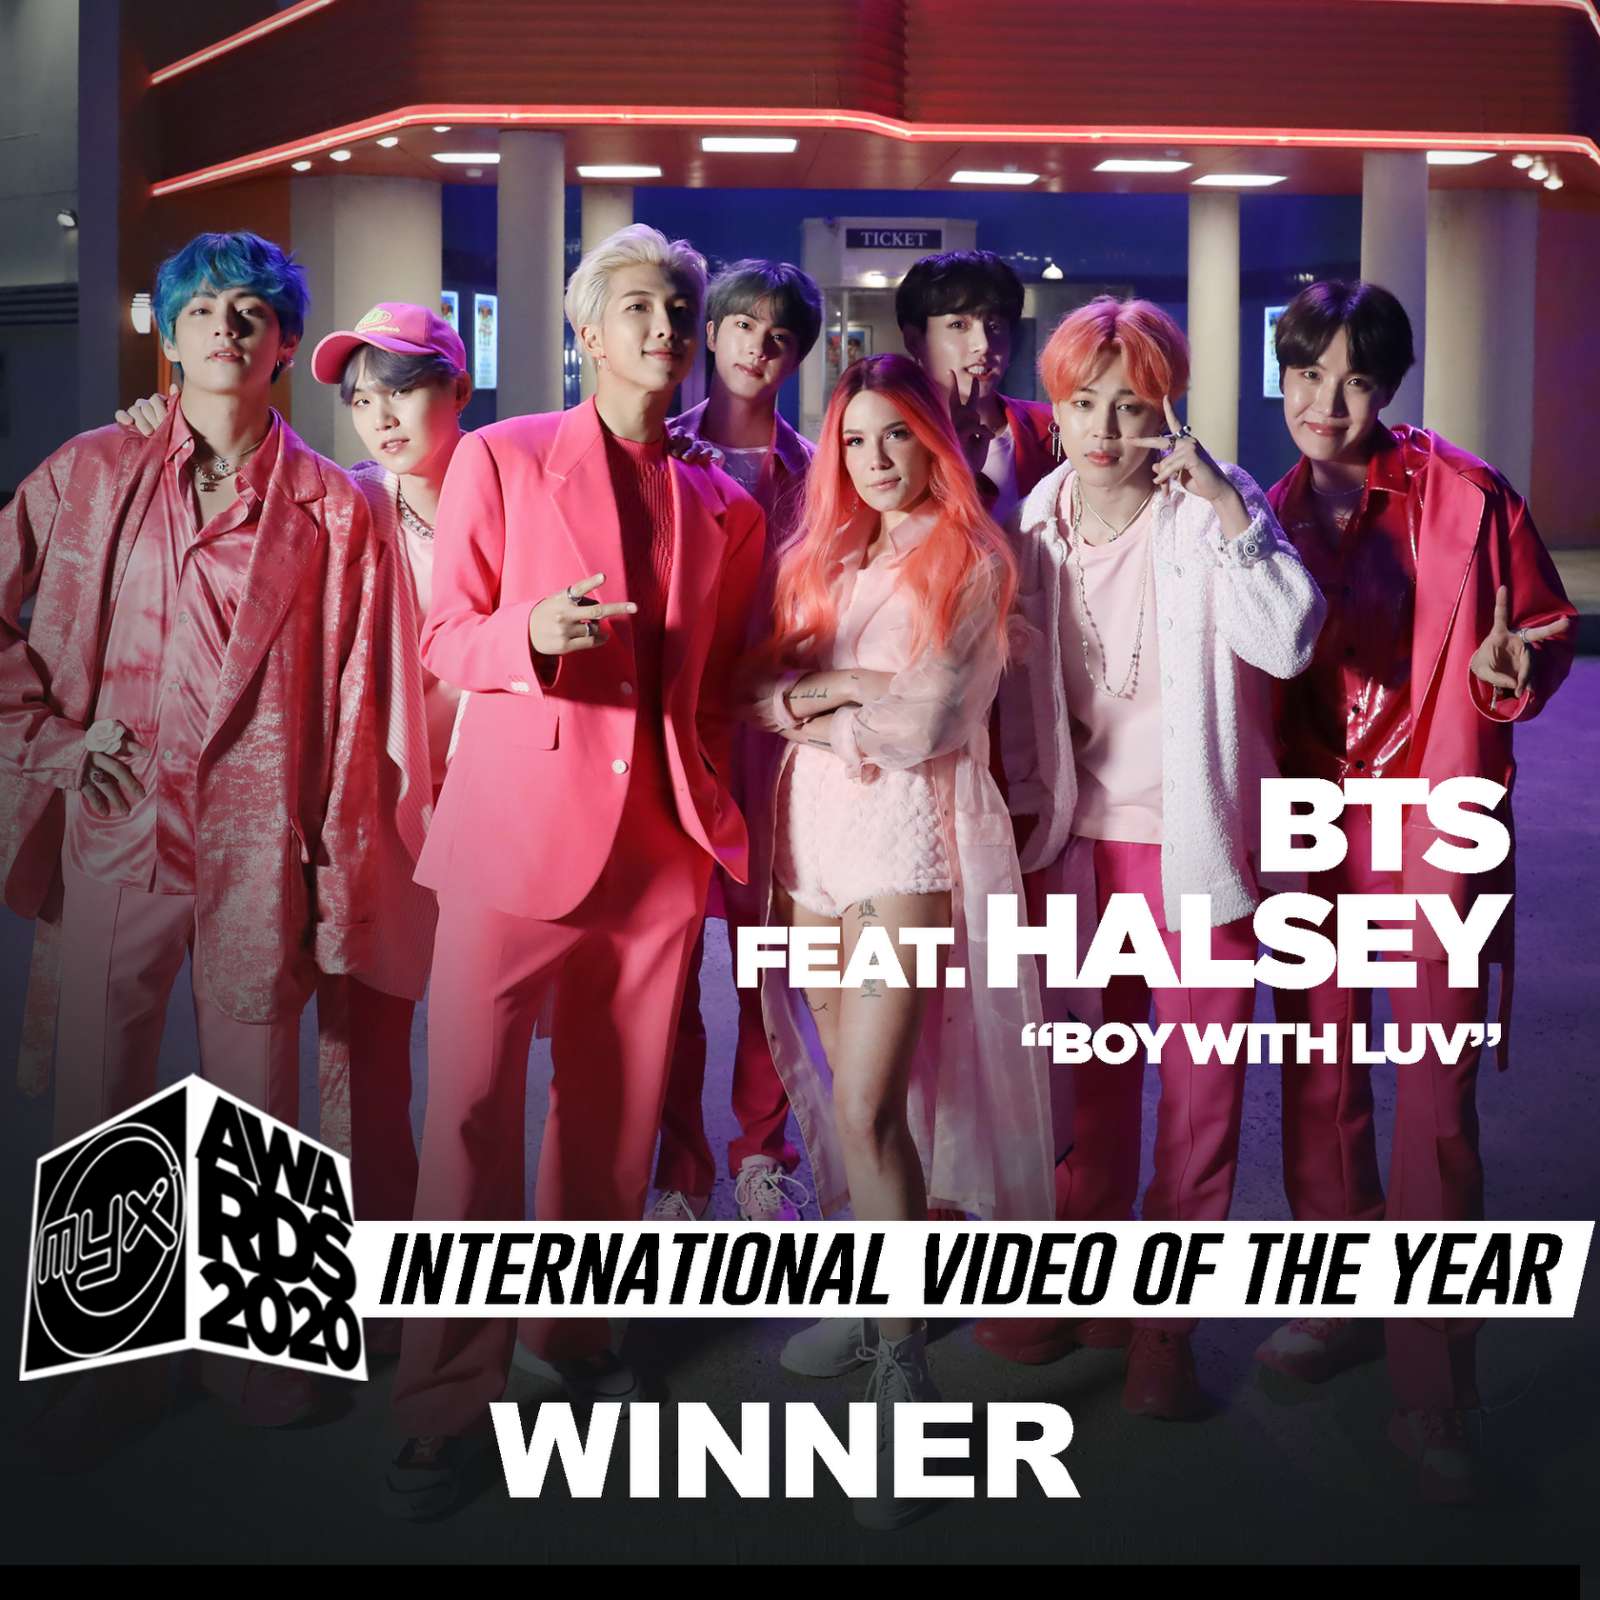 Boy With Luv by BTS feat  Halsey is International Video of the Year